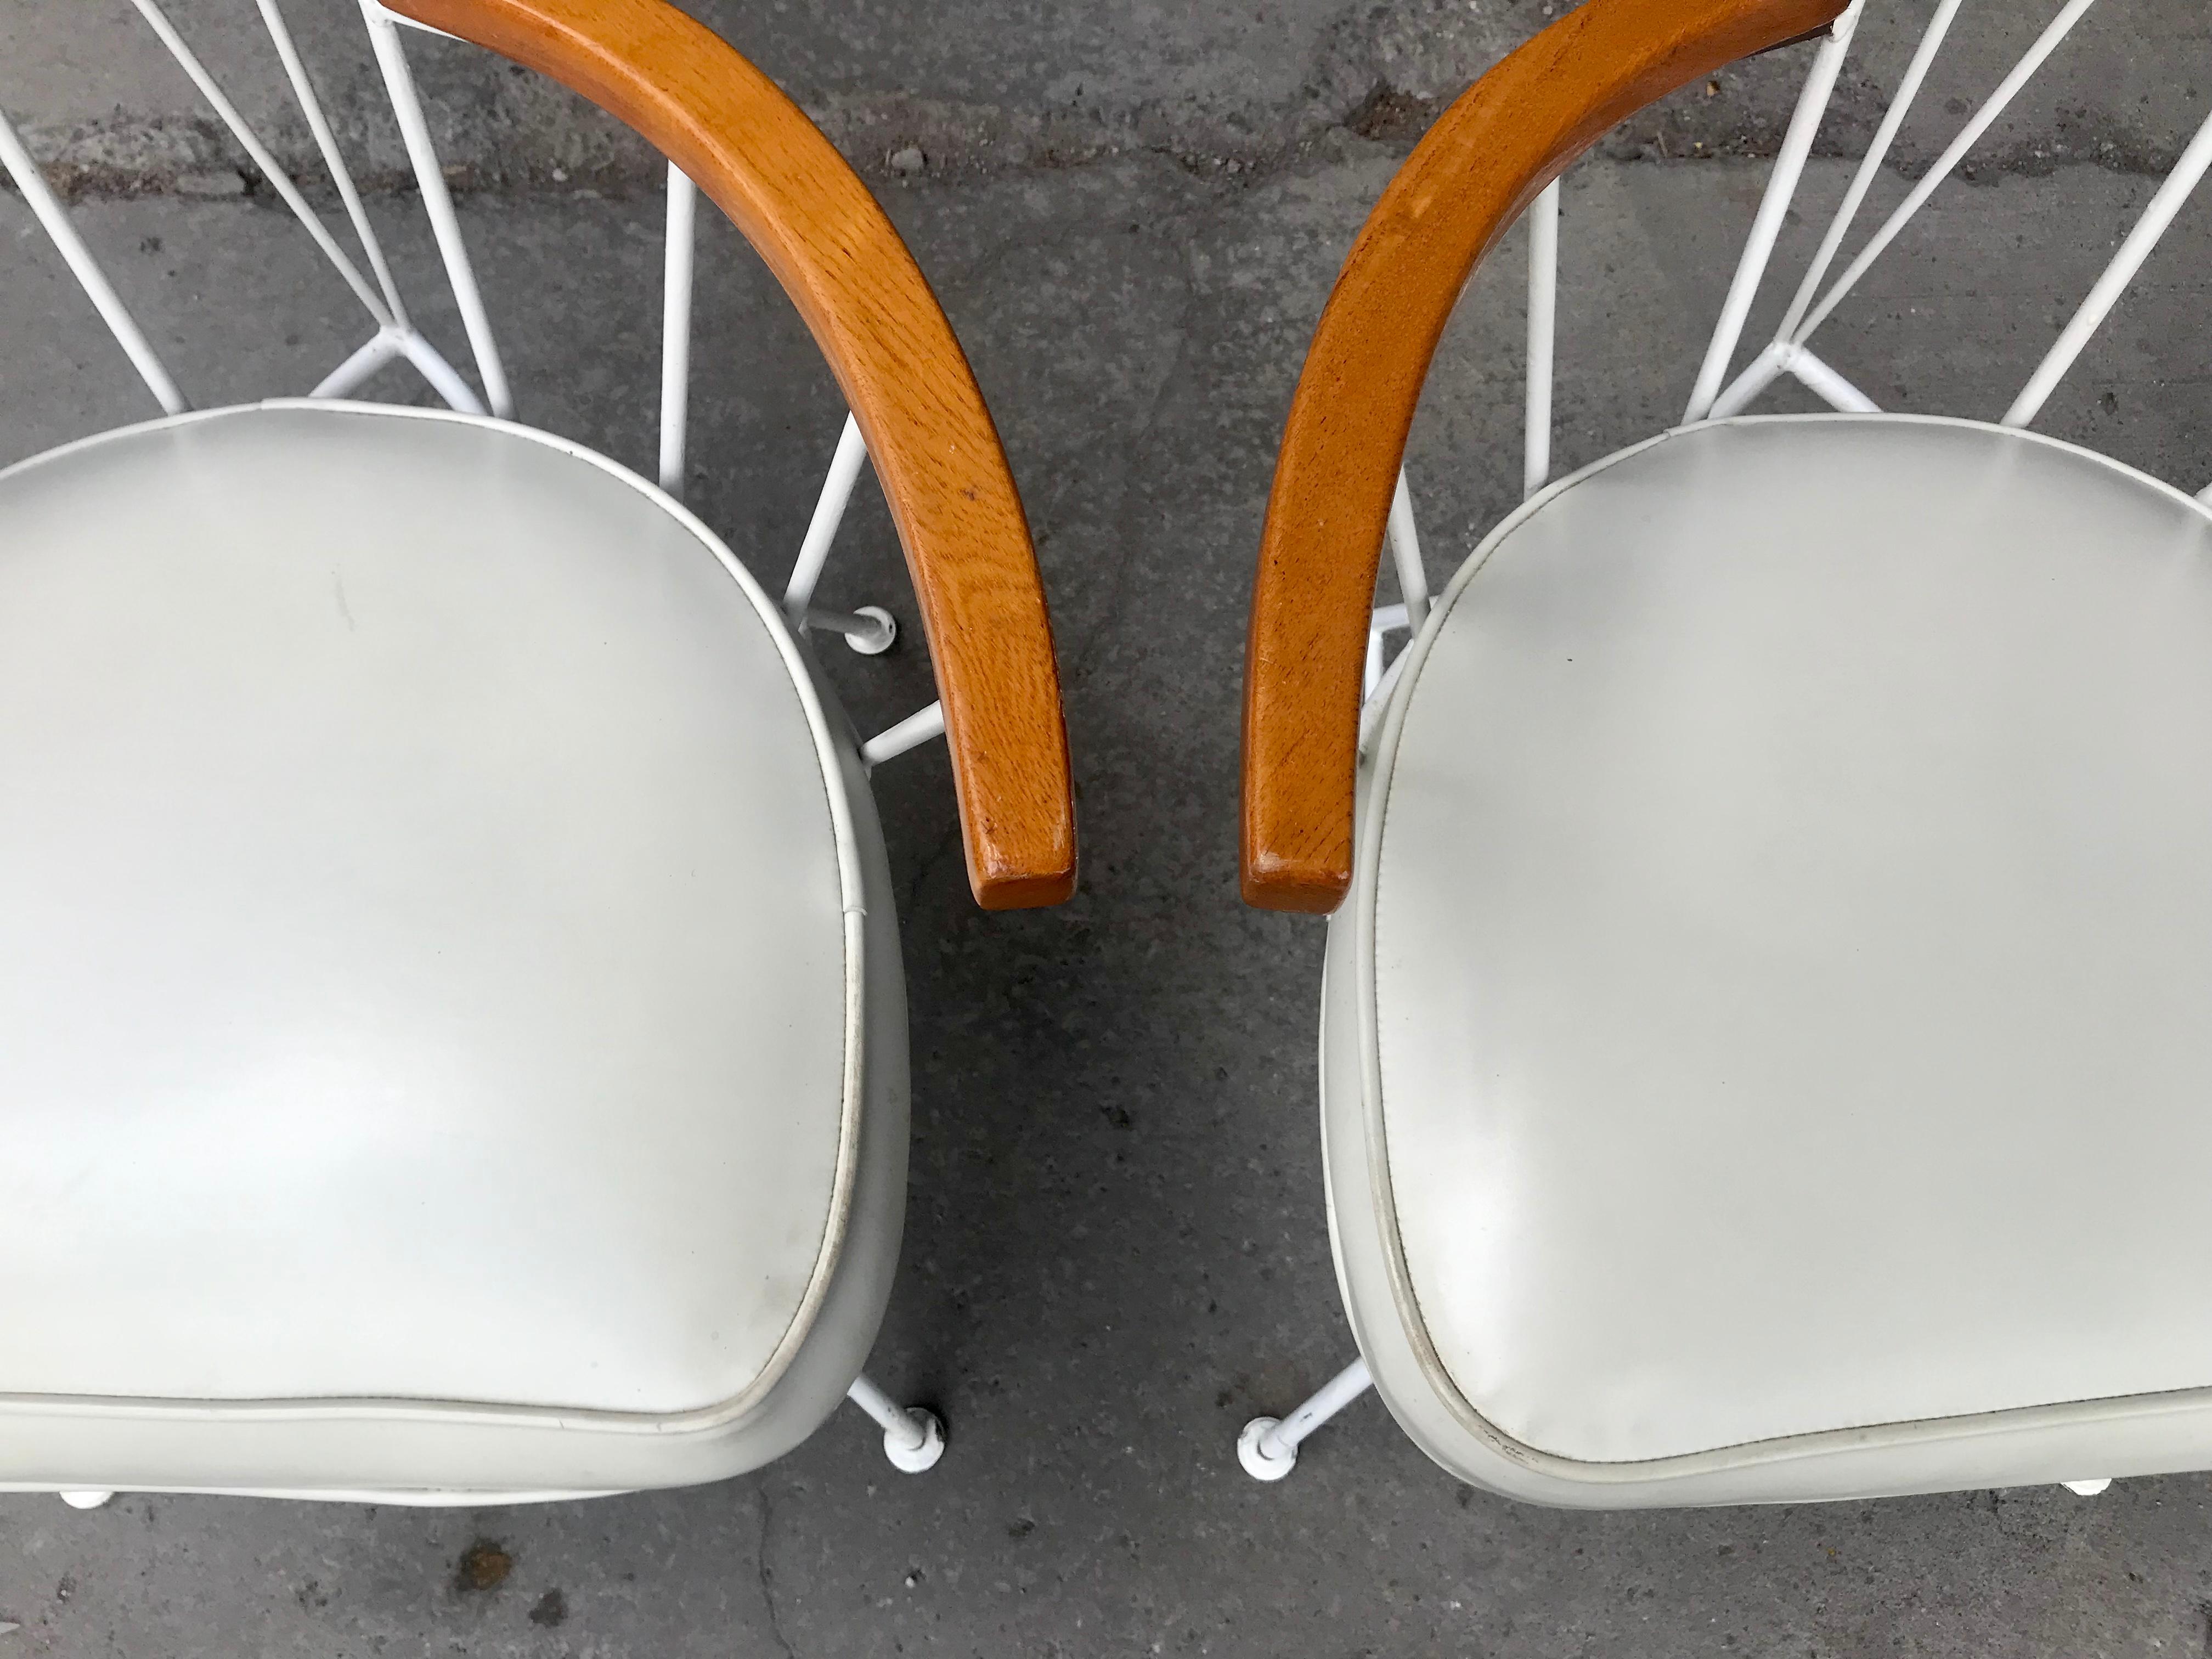 Set of 4 Modernist Iron and wood armchairs designed by Richard McCarthy, beautifully restored frames, retain they're original white Naugahyde seats, Classic Mid-Century Modern design, often attributed to Paul McCobb, Extremely comfortable,